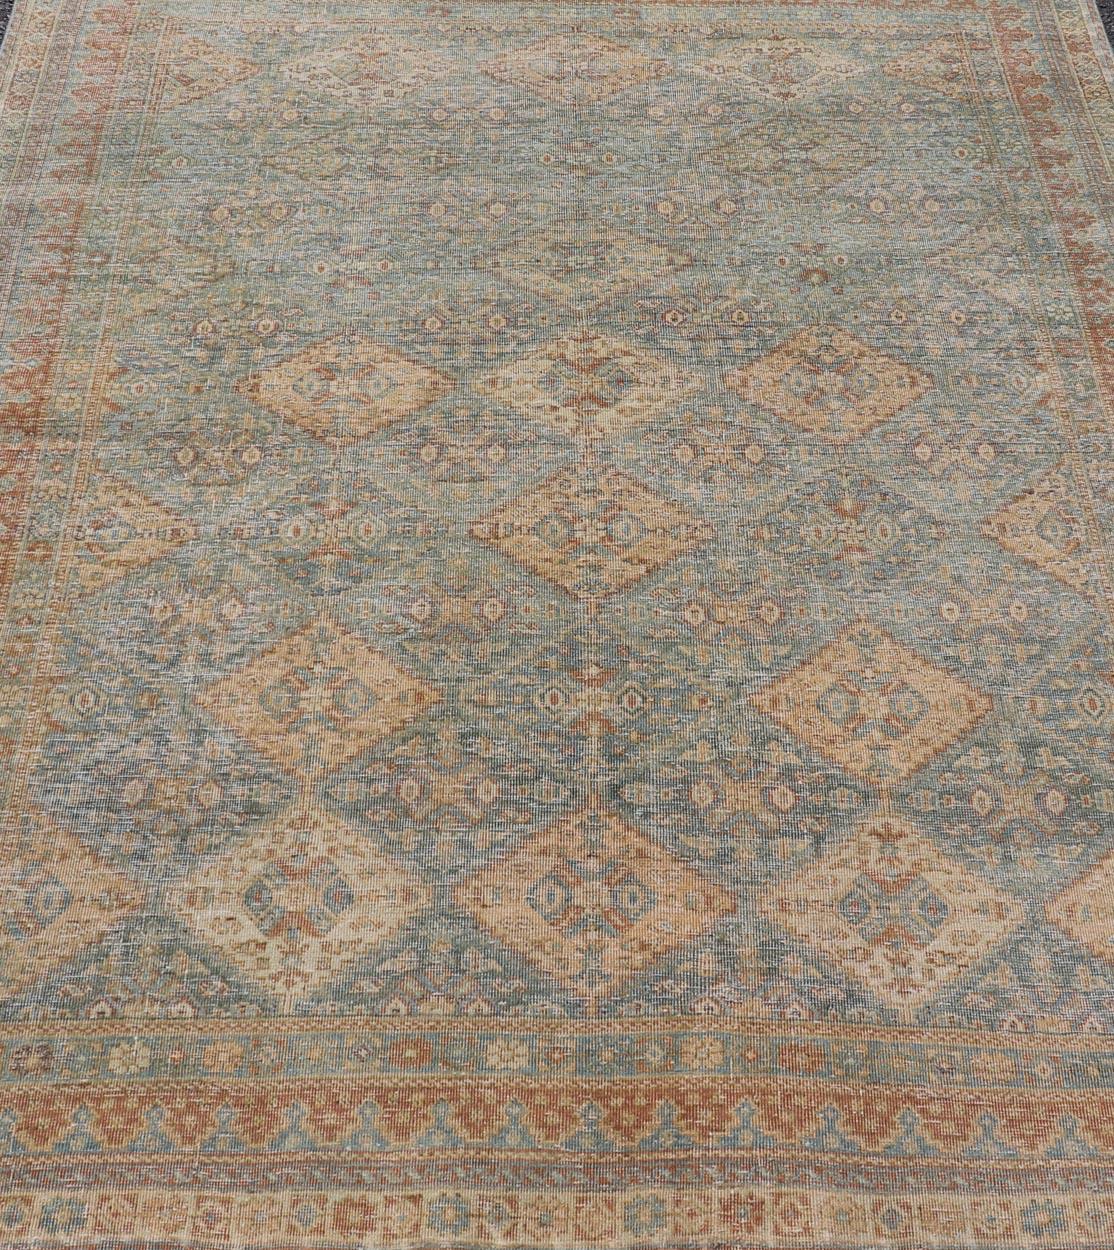 Antique Persian Tabriz Rug in Wool with Diamond Design in Blue, Apricot & Gray For Sale 4